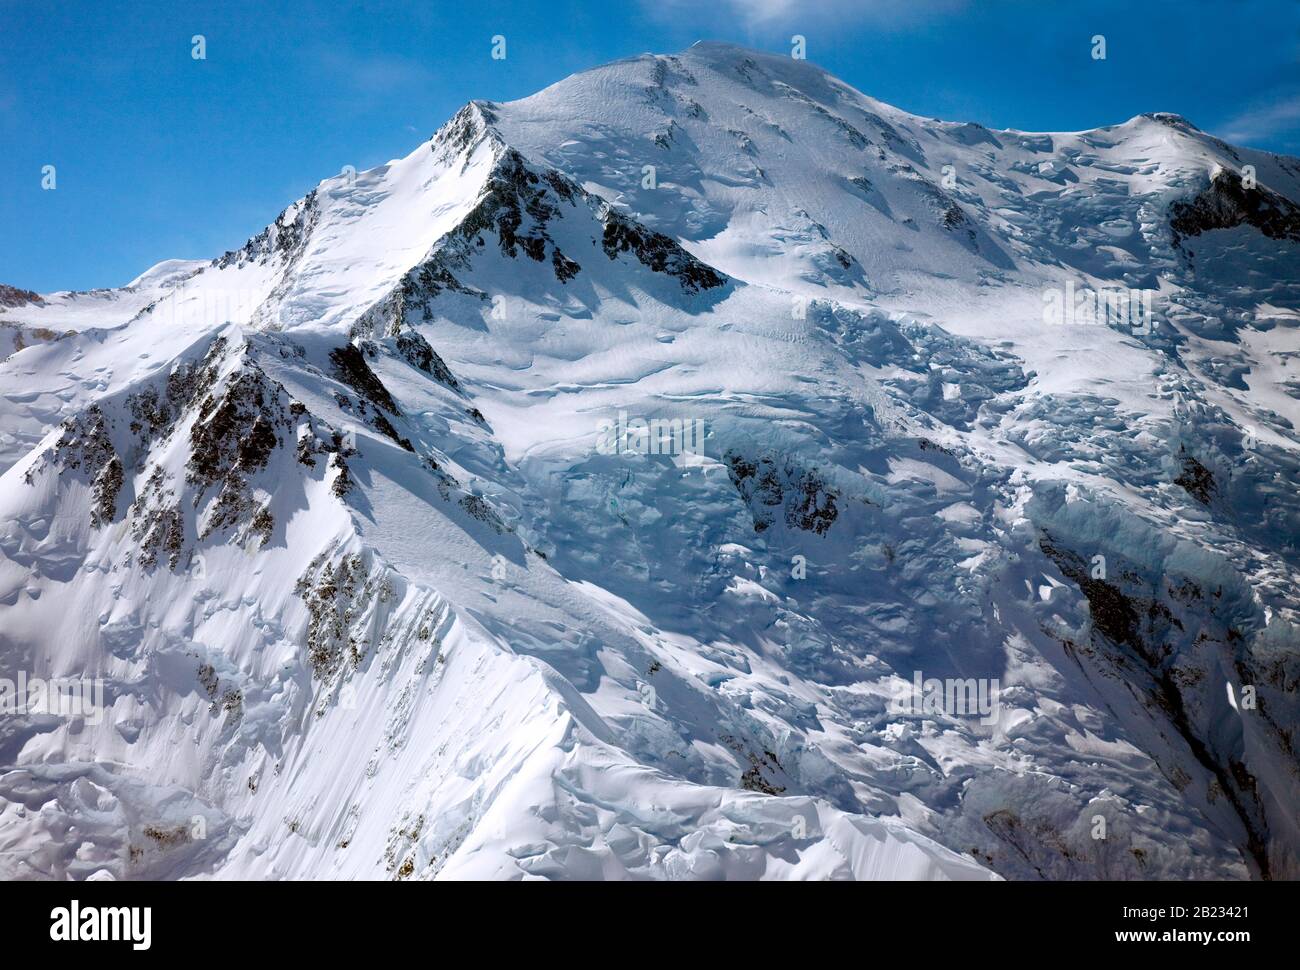 DENALI NATIONAL PARK, USA - 06 Aug 2008 - Aerial view of Mount McKinley or Denali ('The Great One') in Alaska is the highest mountain peak in North Am Stock Photo